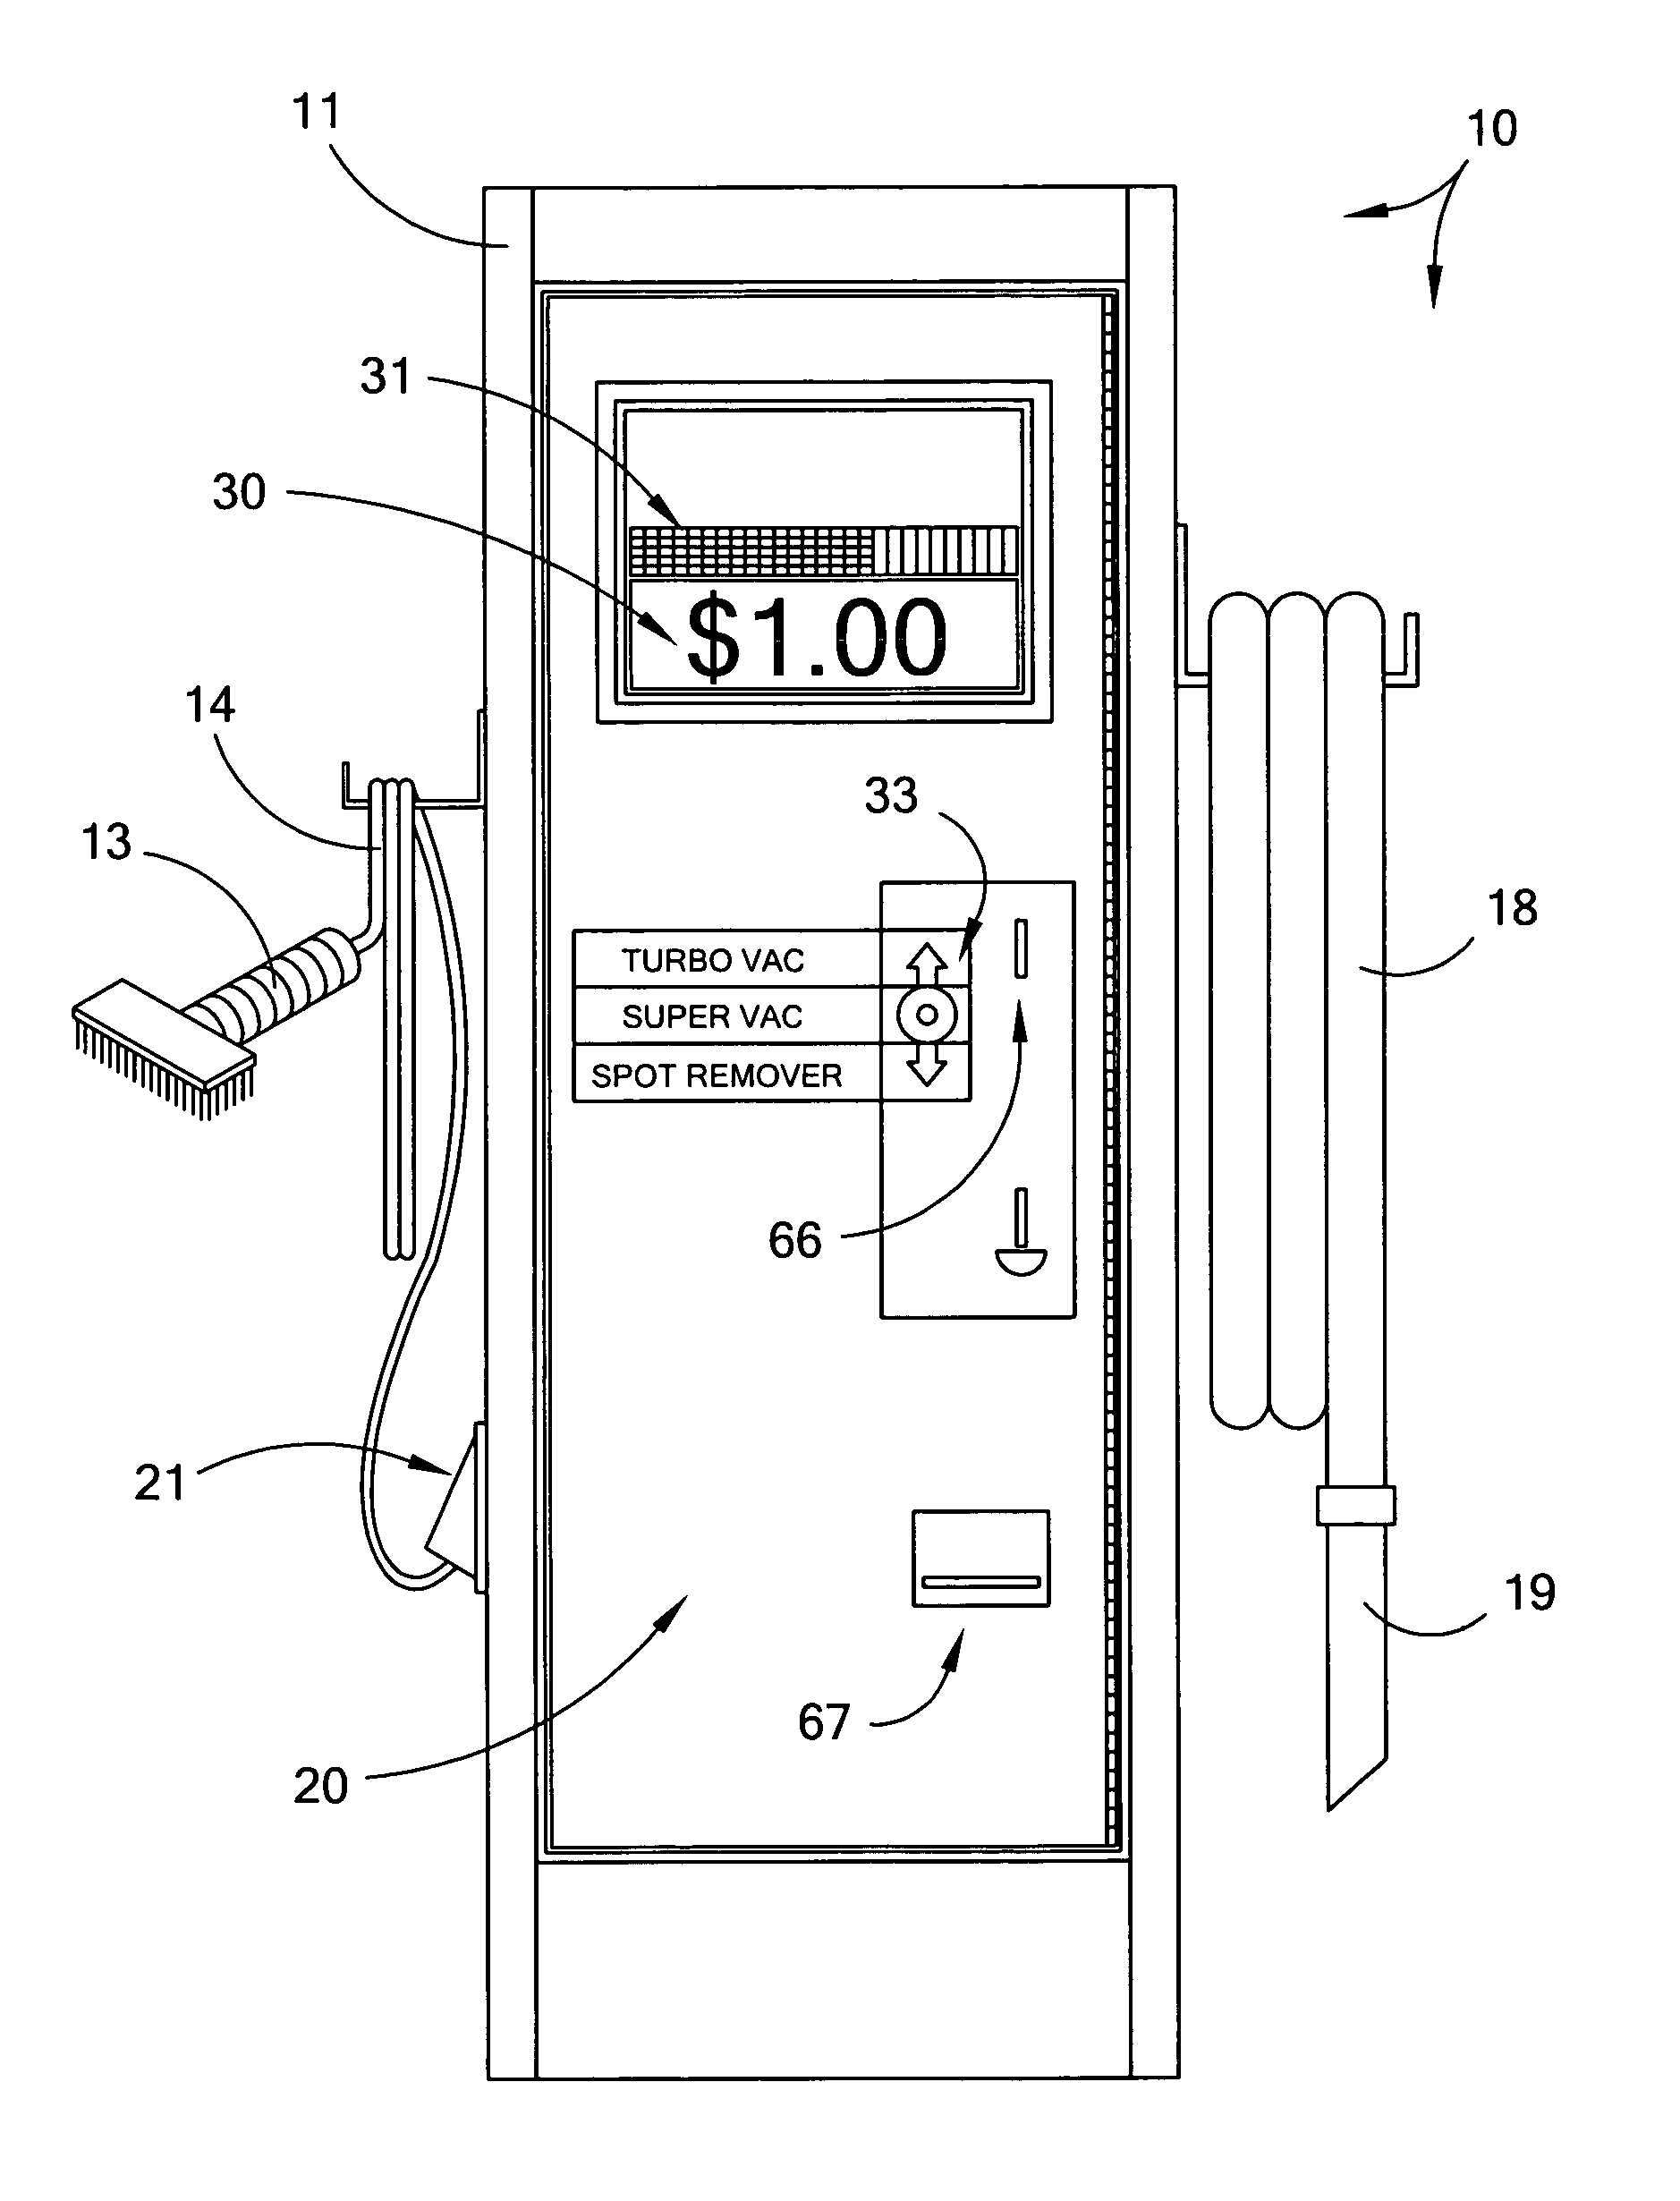 Multiple service vending machine with unitized pricing and proportionalized analog display